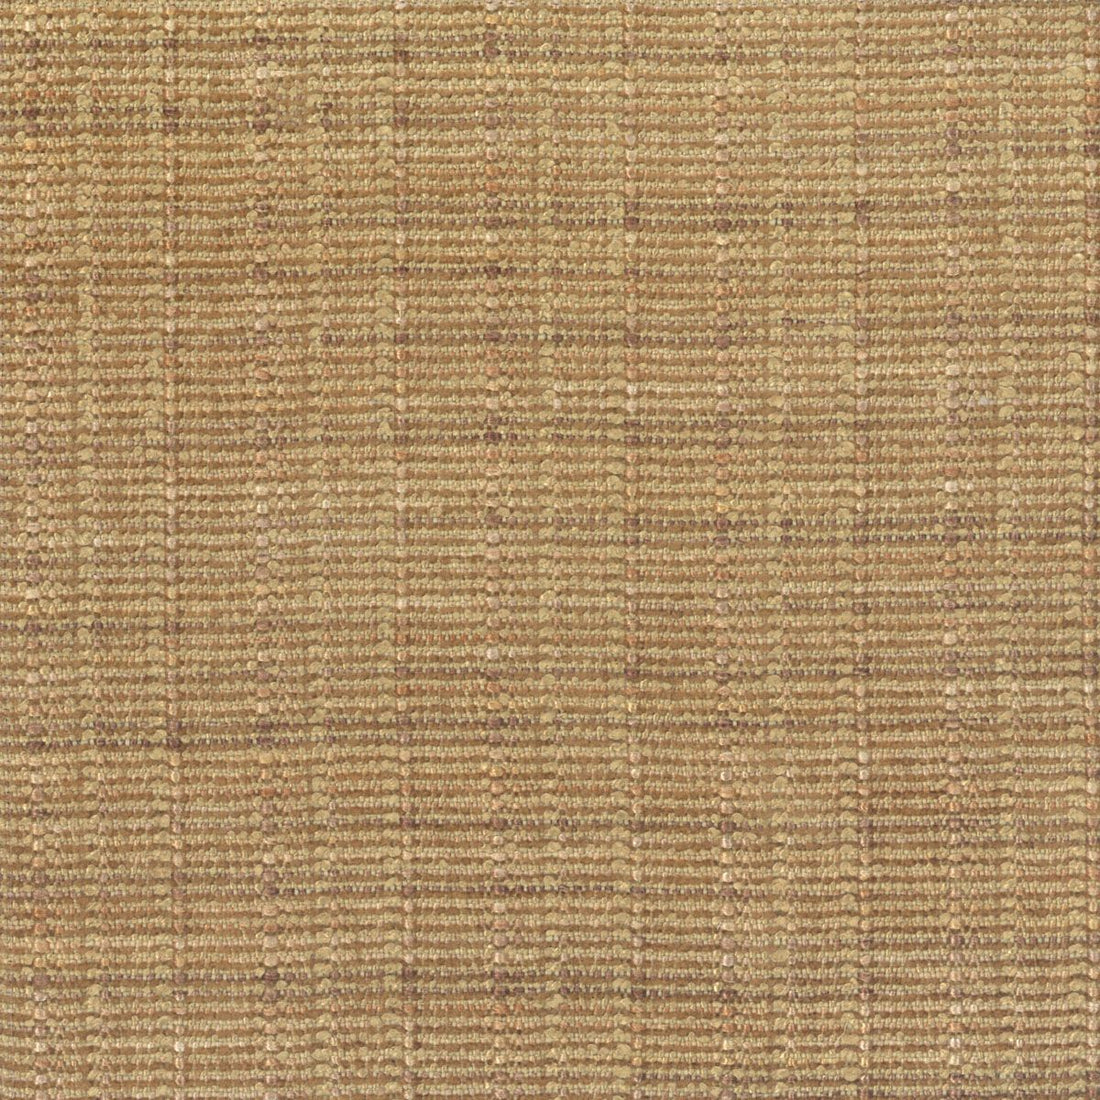 Maddox fabric in sisal color - pattern number VW 0001F017 - by Scalamandre in the Old World Weavers collection